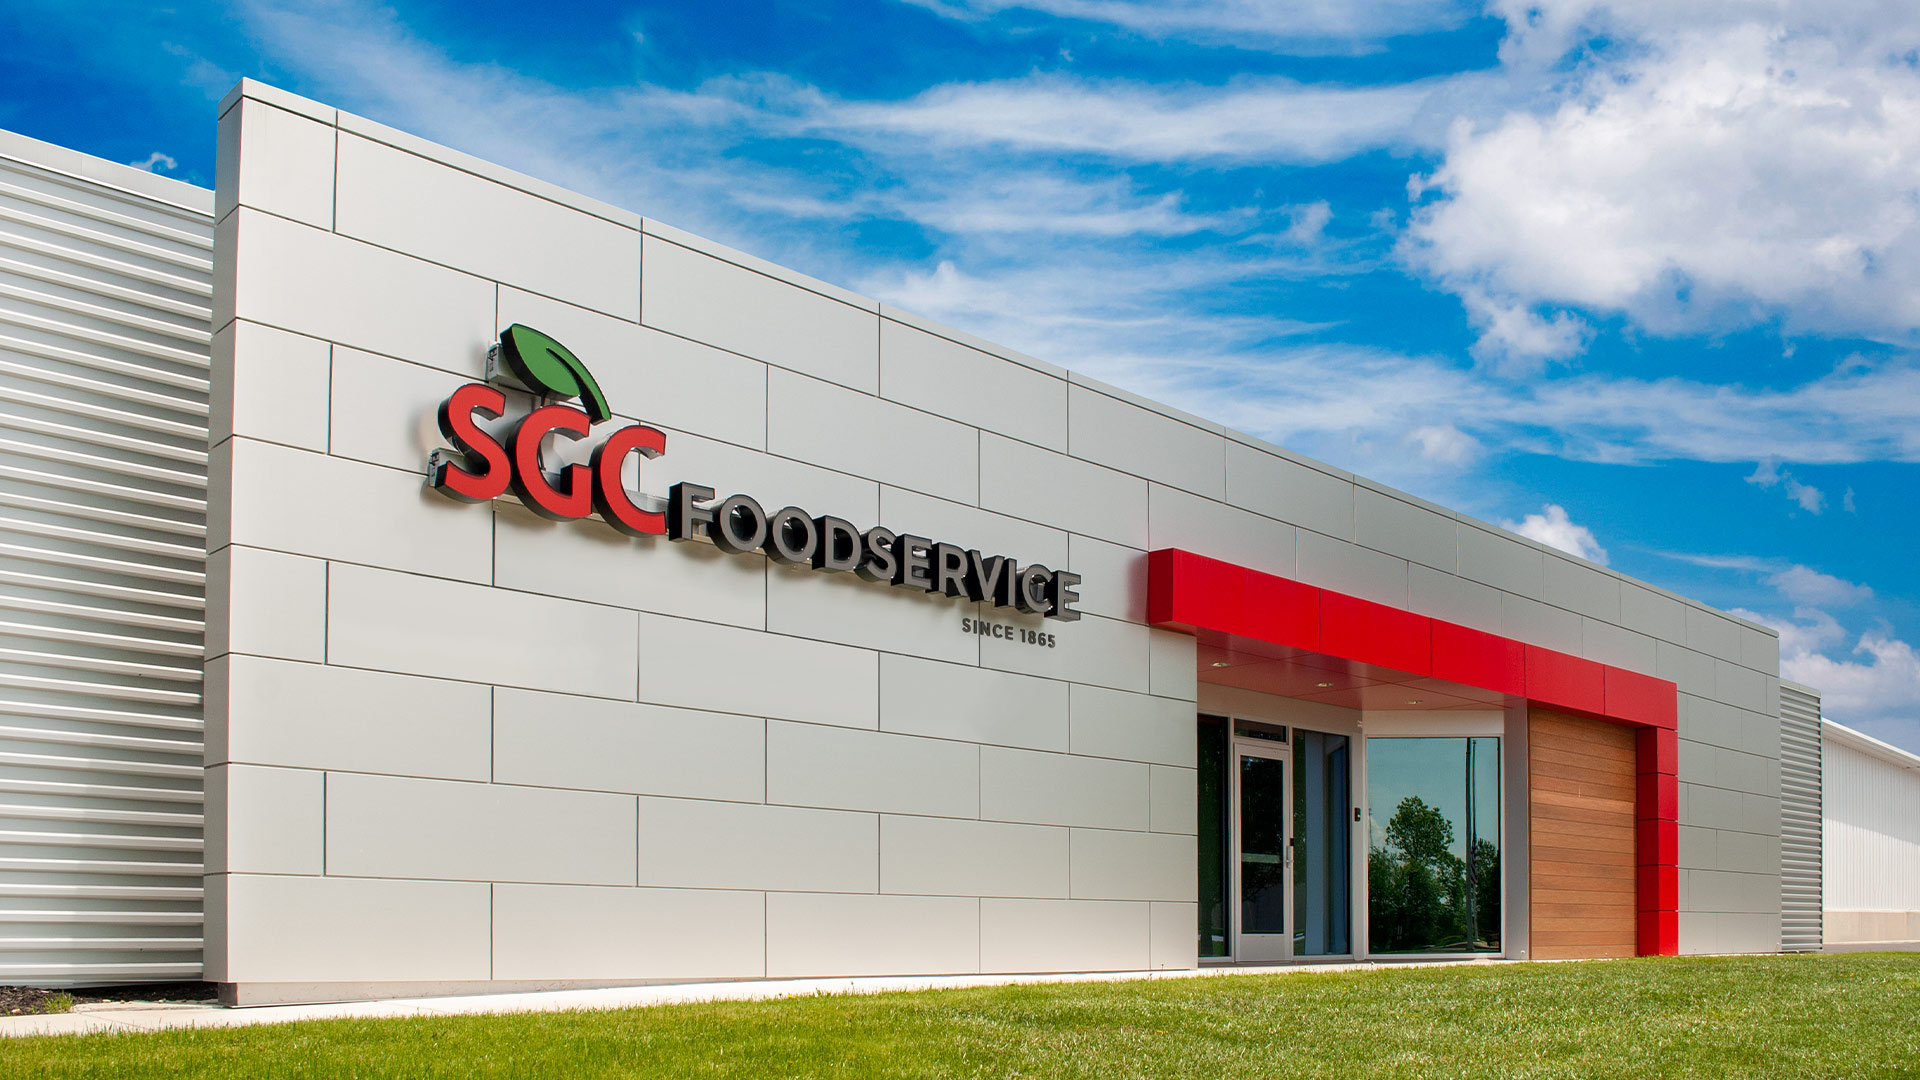 SGC Foodservice Springfield Grocer Company Today
